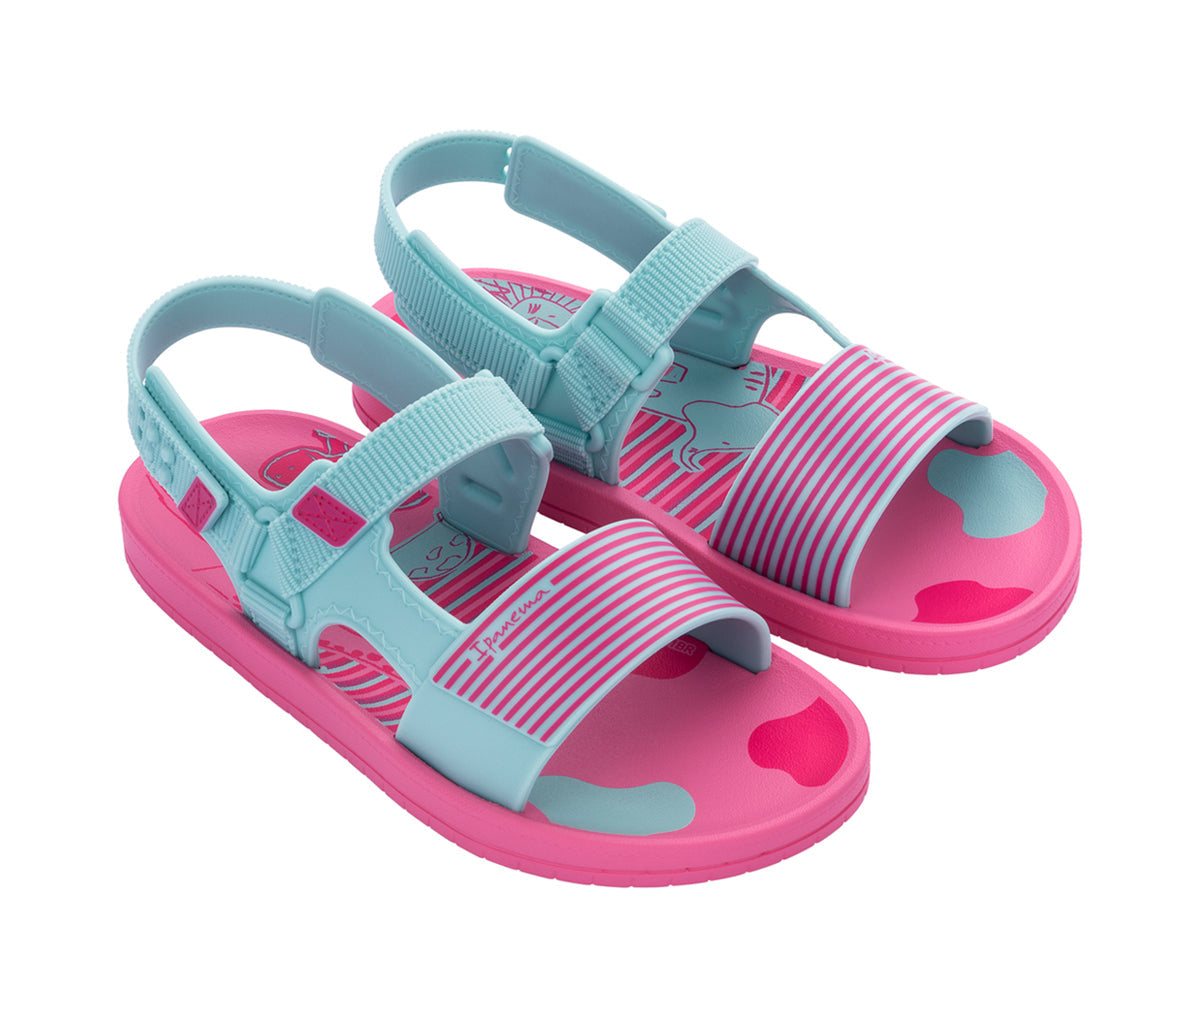 Angled view of a pair of pink and green Ipanema Recreio Papate kids Sandals.